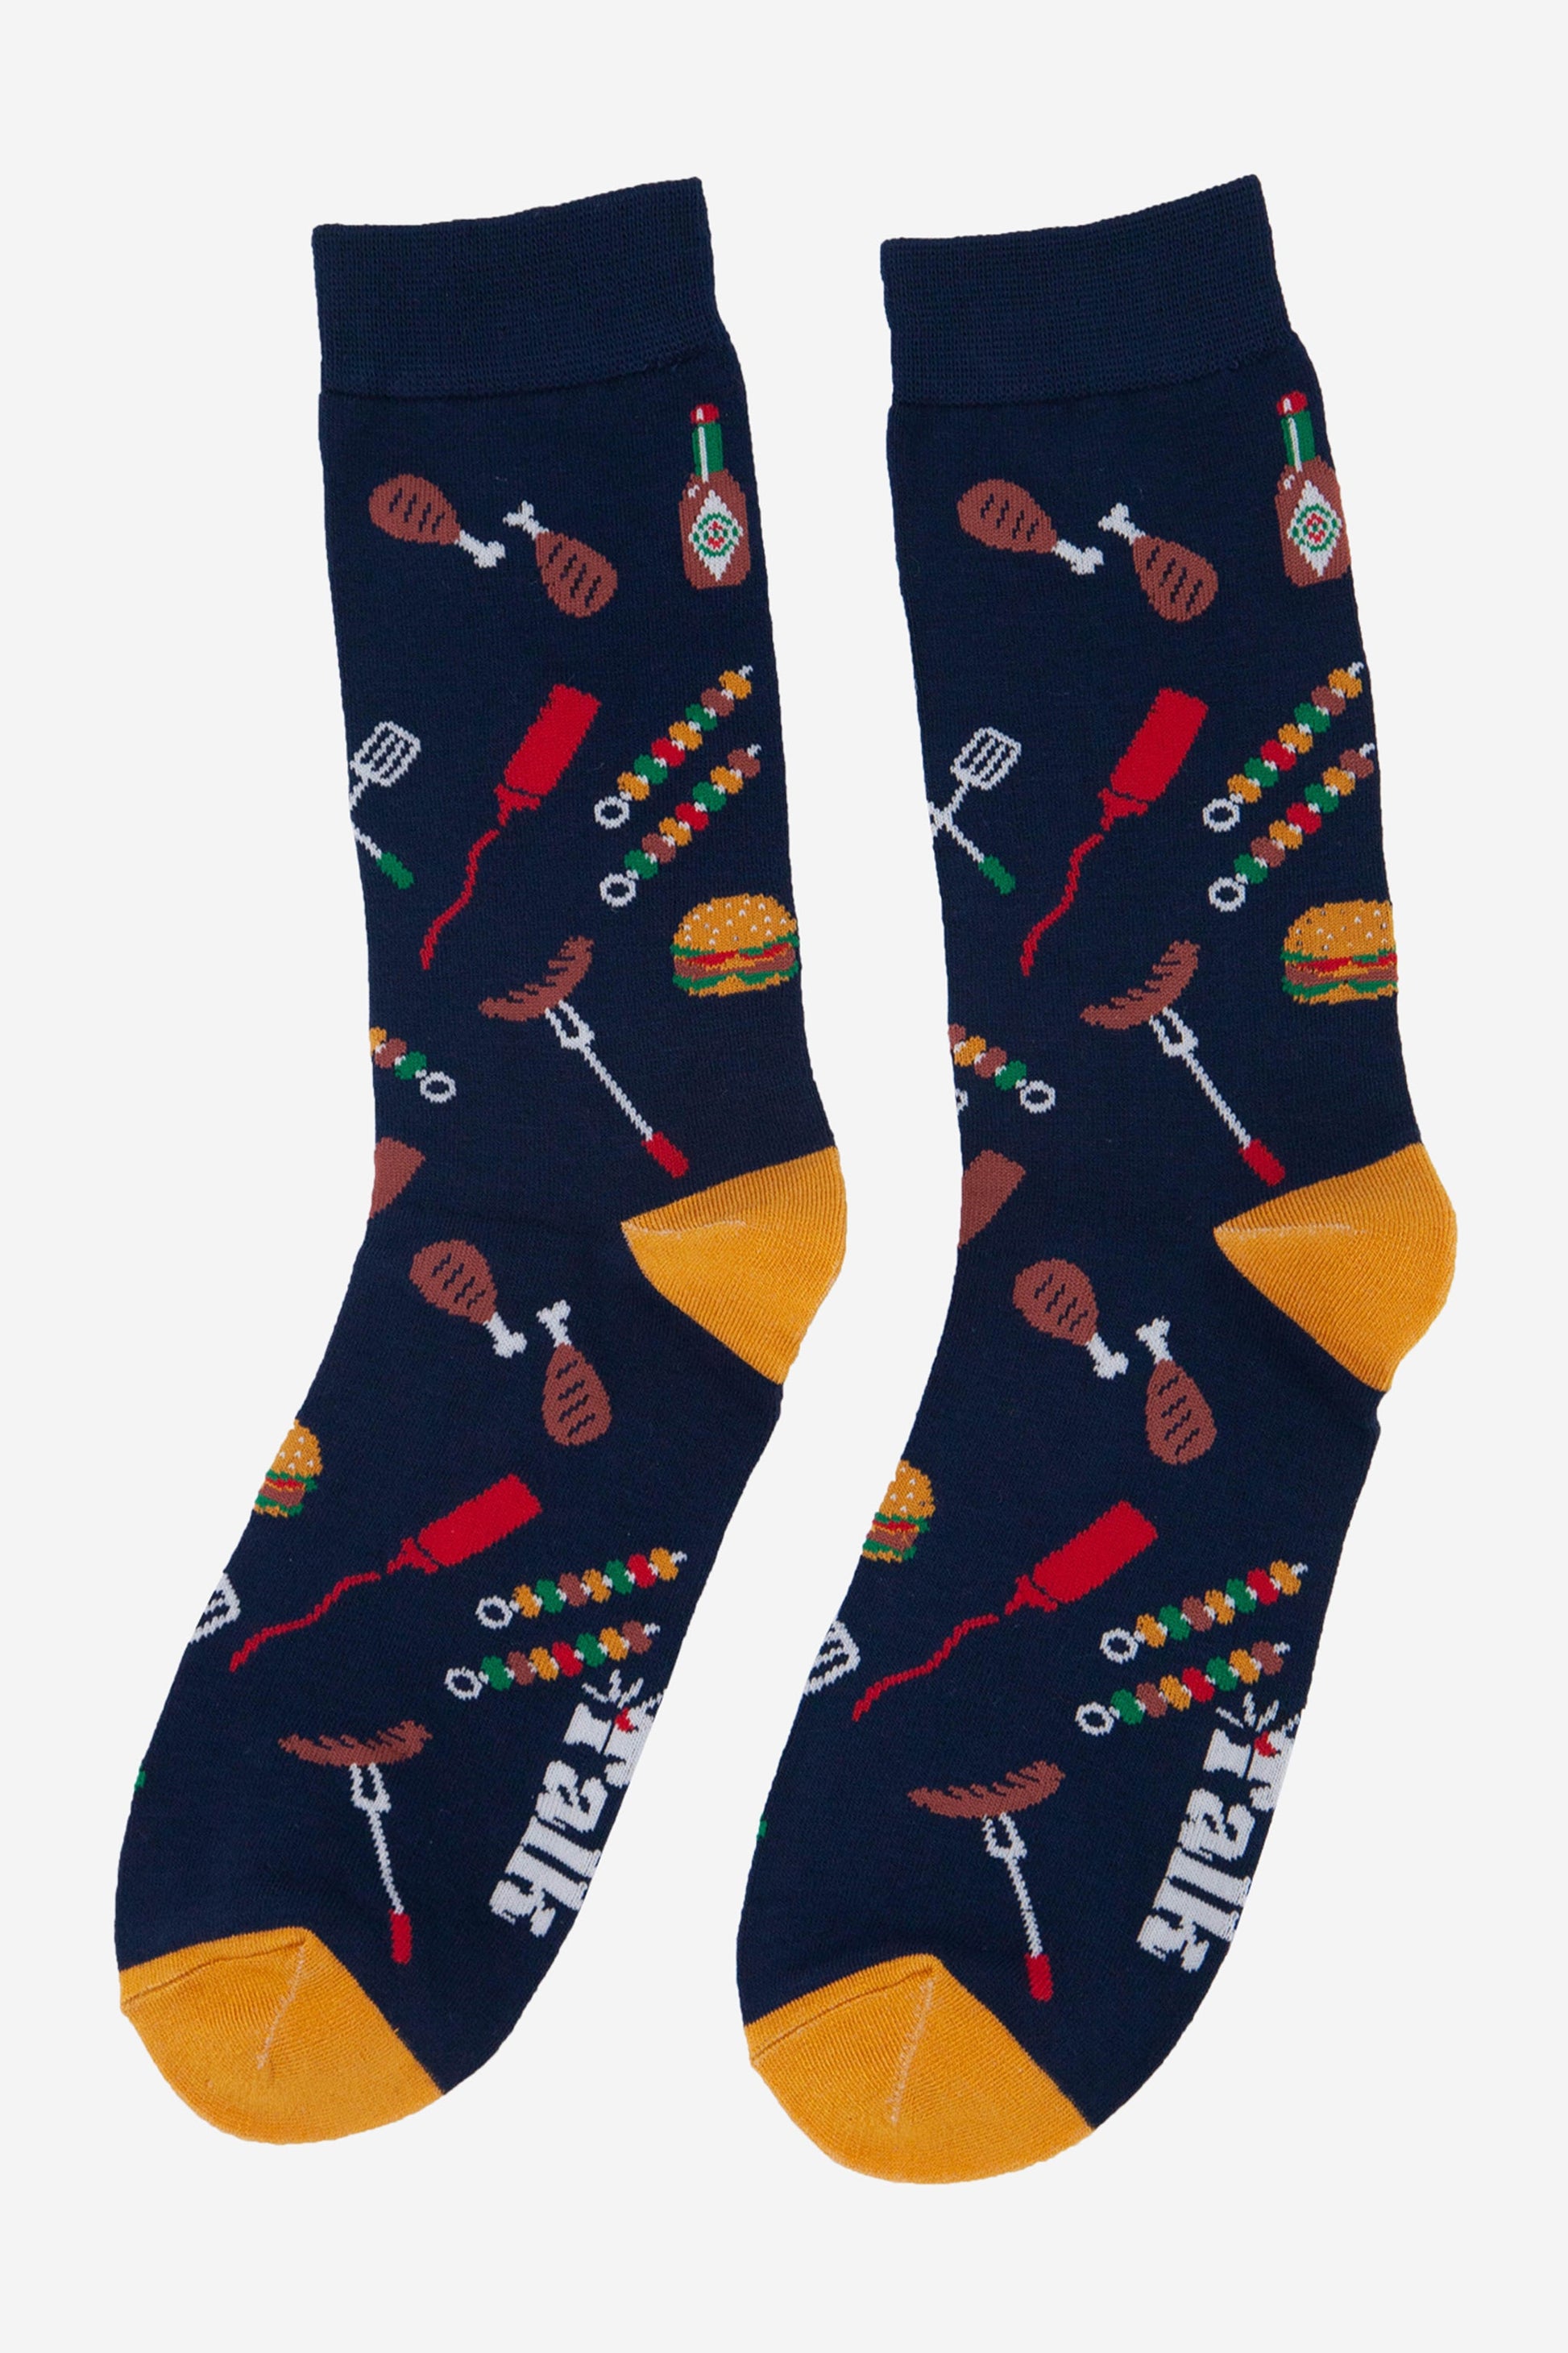 mens barbecue food socks in navy blue and yellow